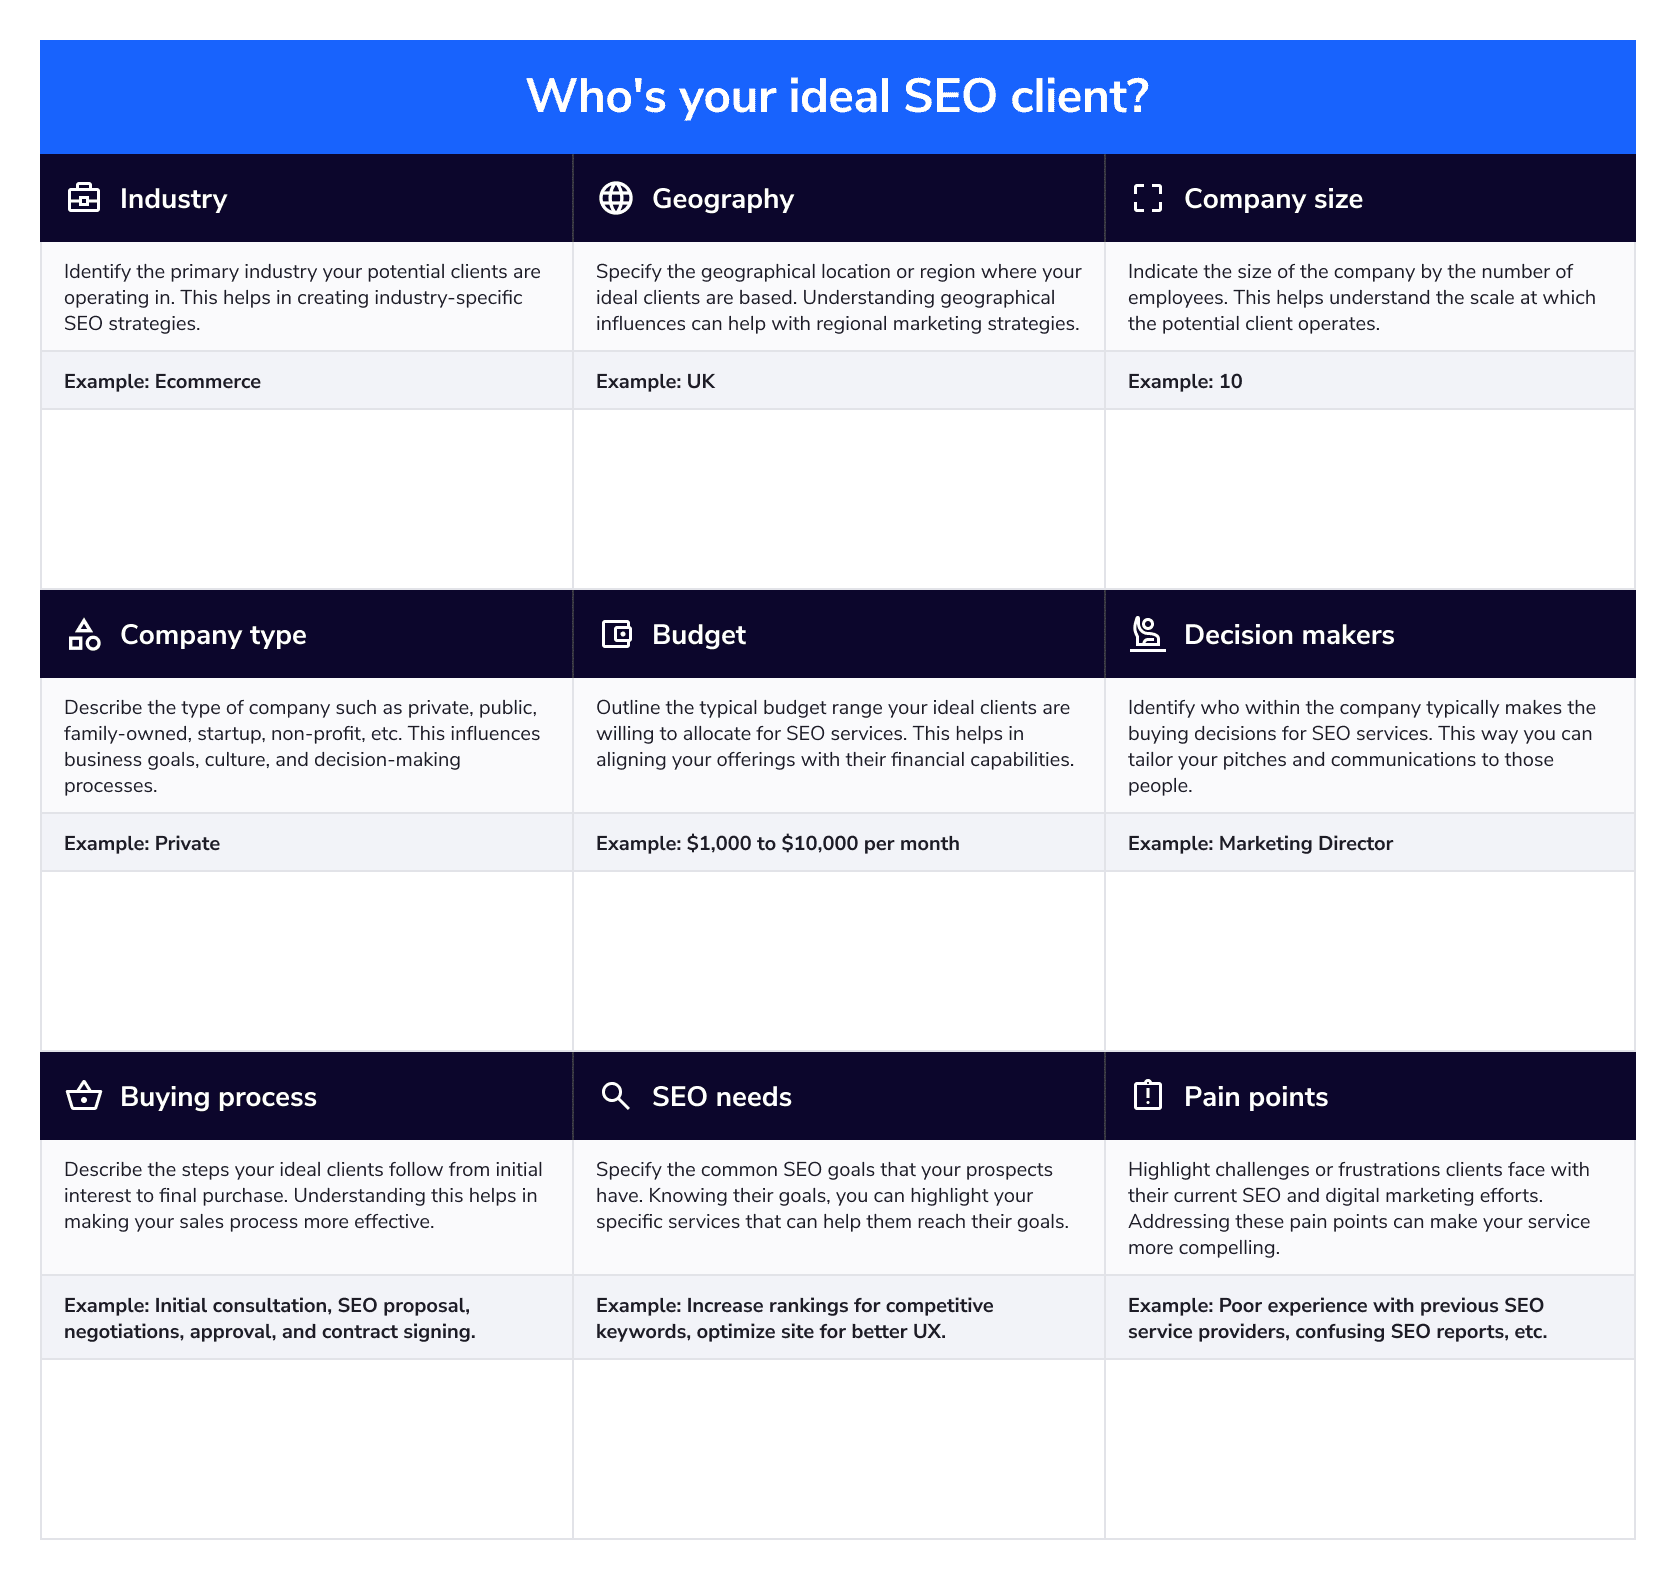 Identify your ideal SEO client